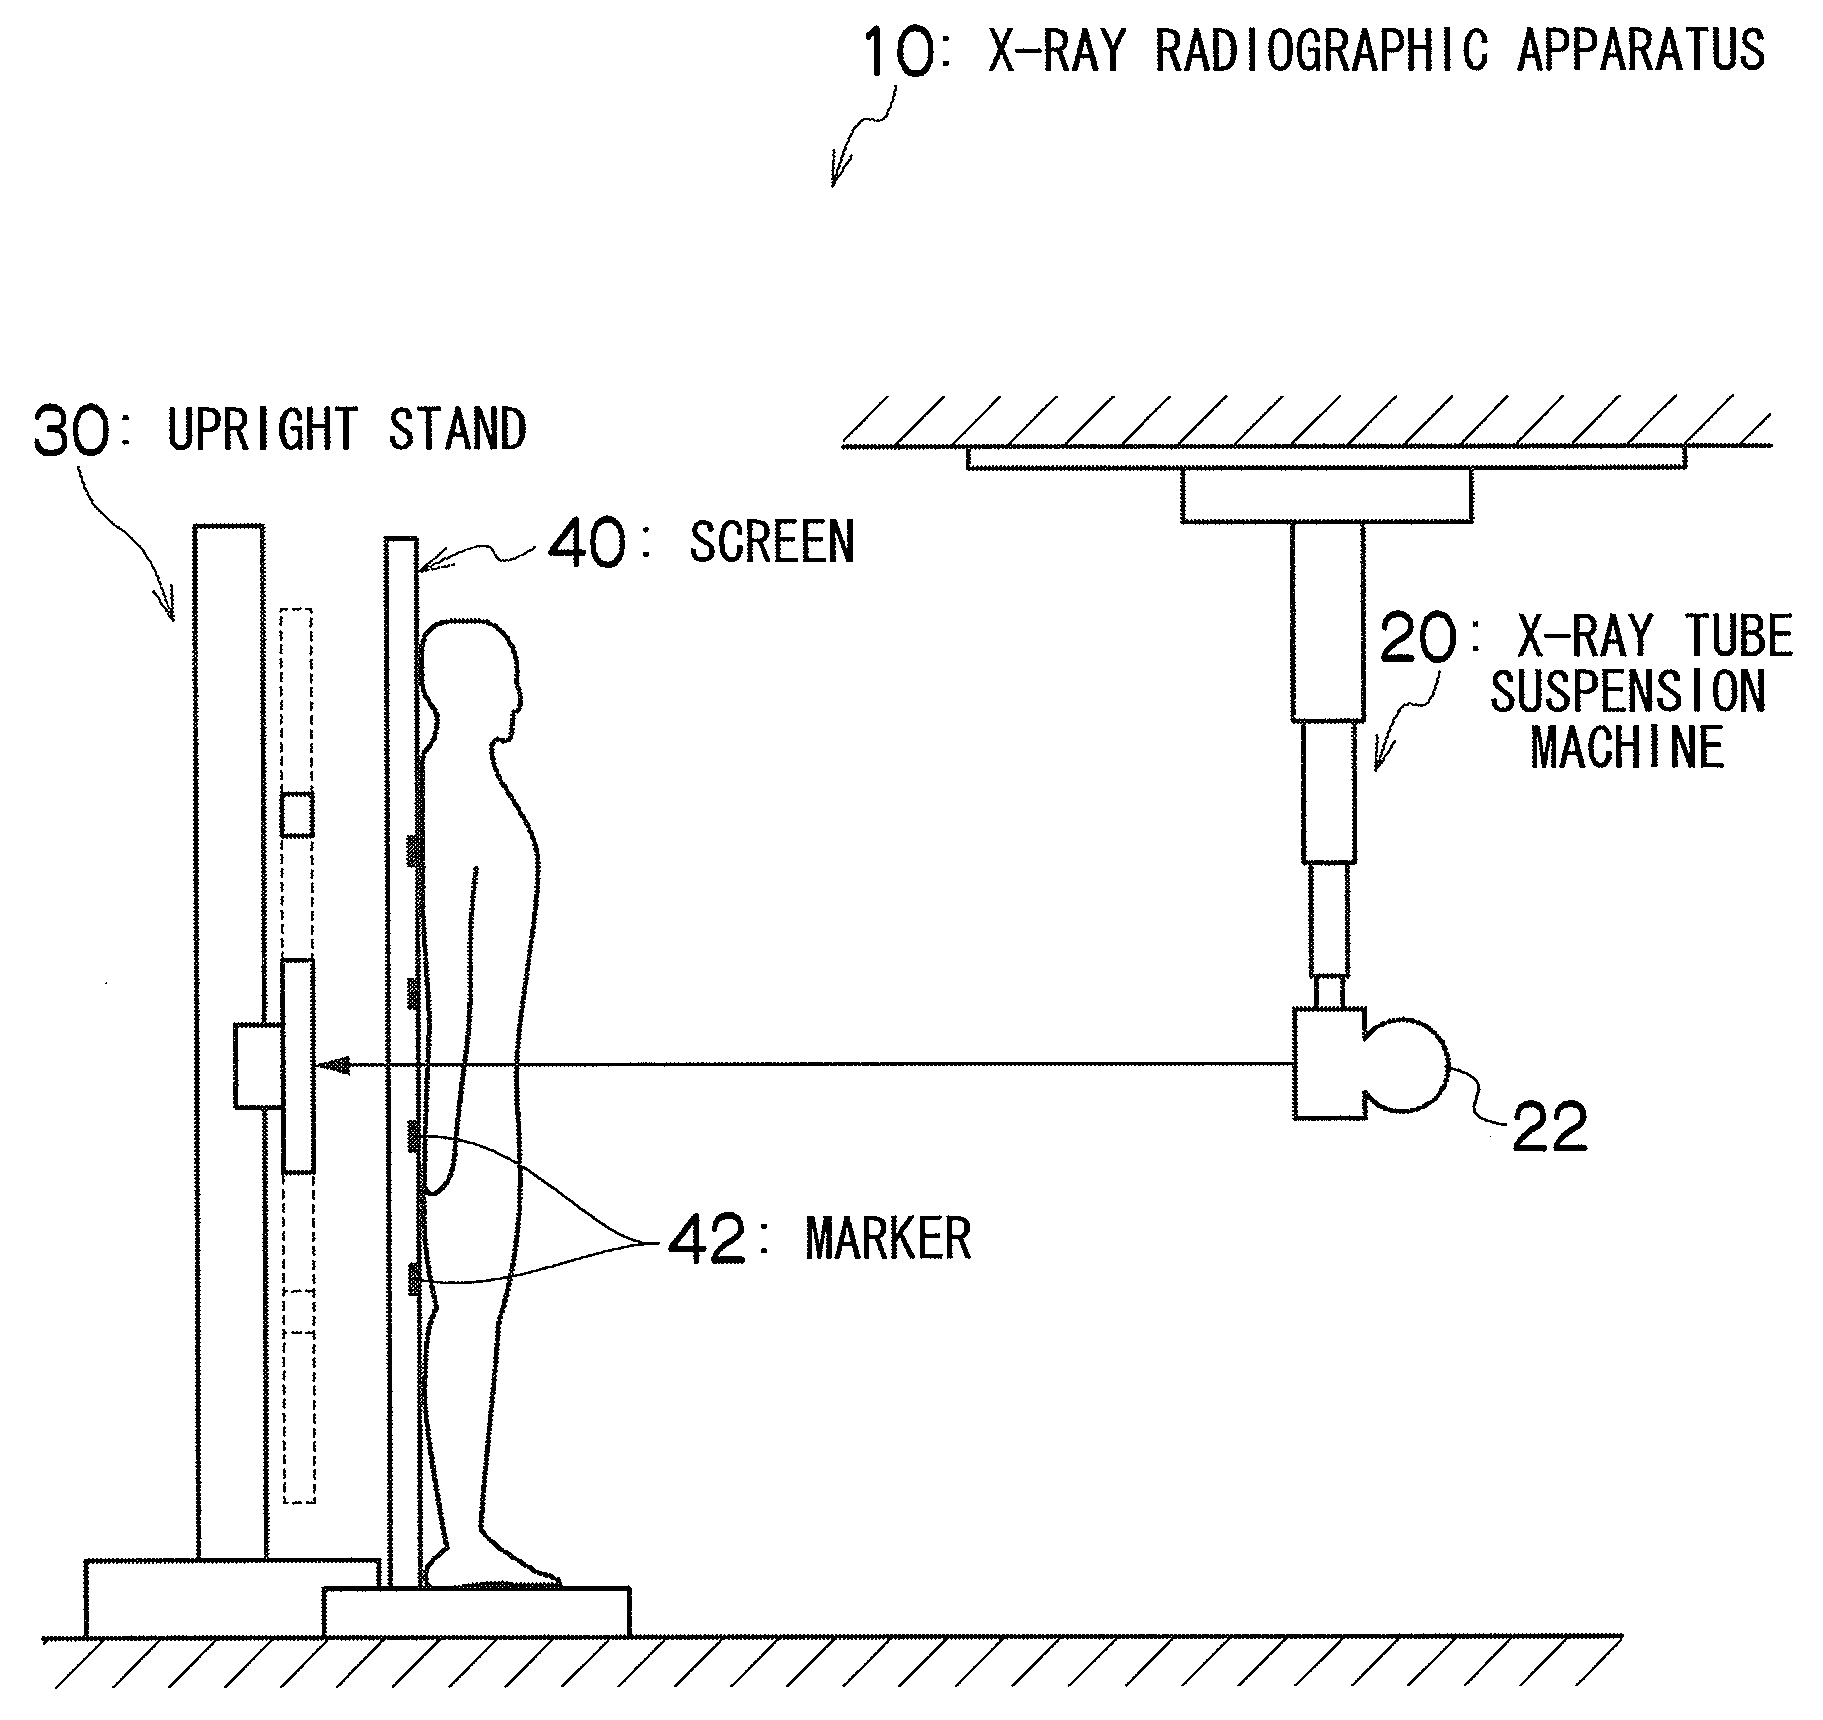 X-ray radiographic apparatus and method